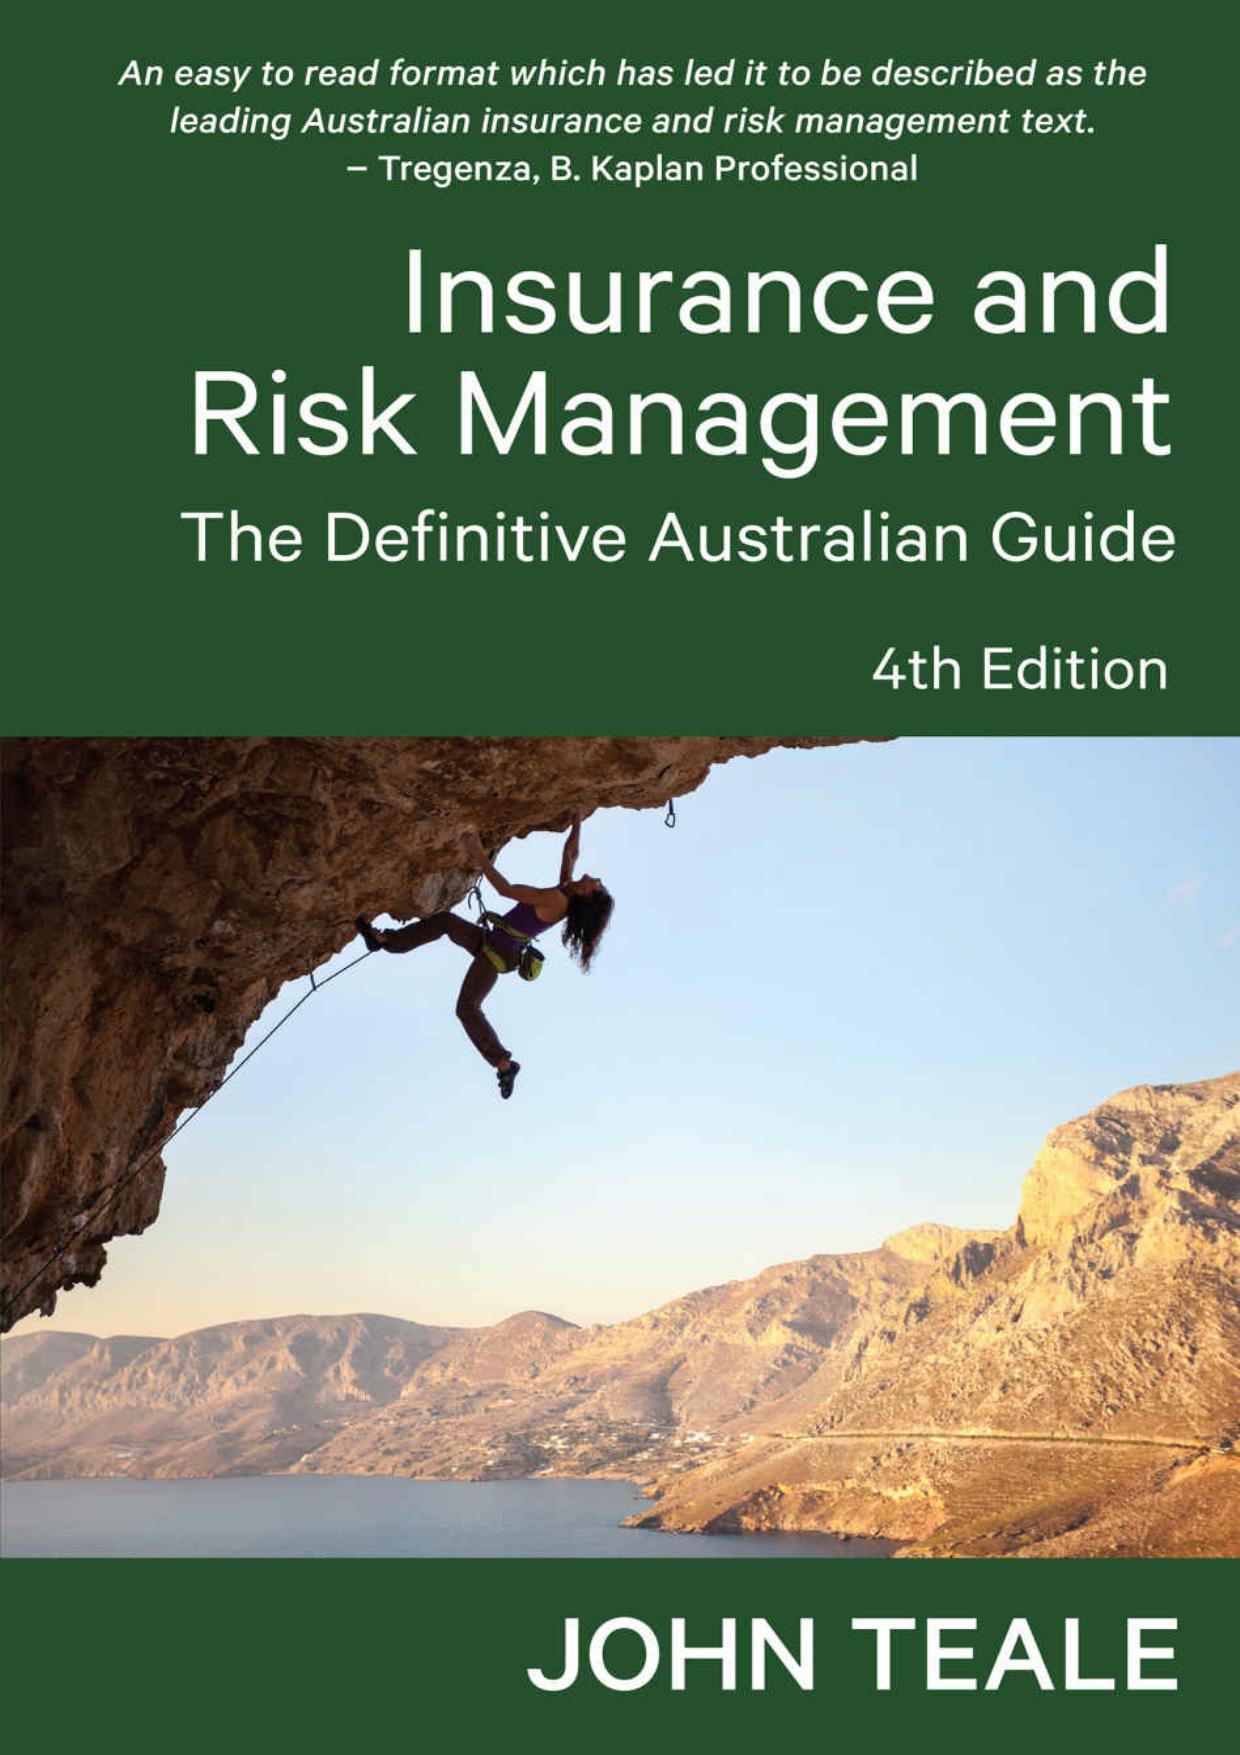 (eBook PDF)Insurance and Risk Management: The Definitive Australian Guide 4th Edition by John Teale